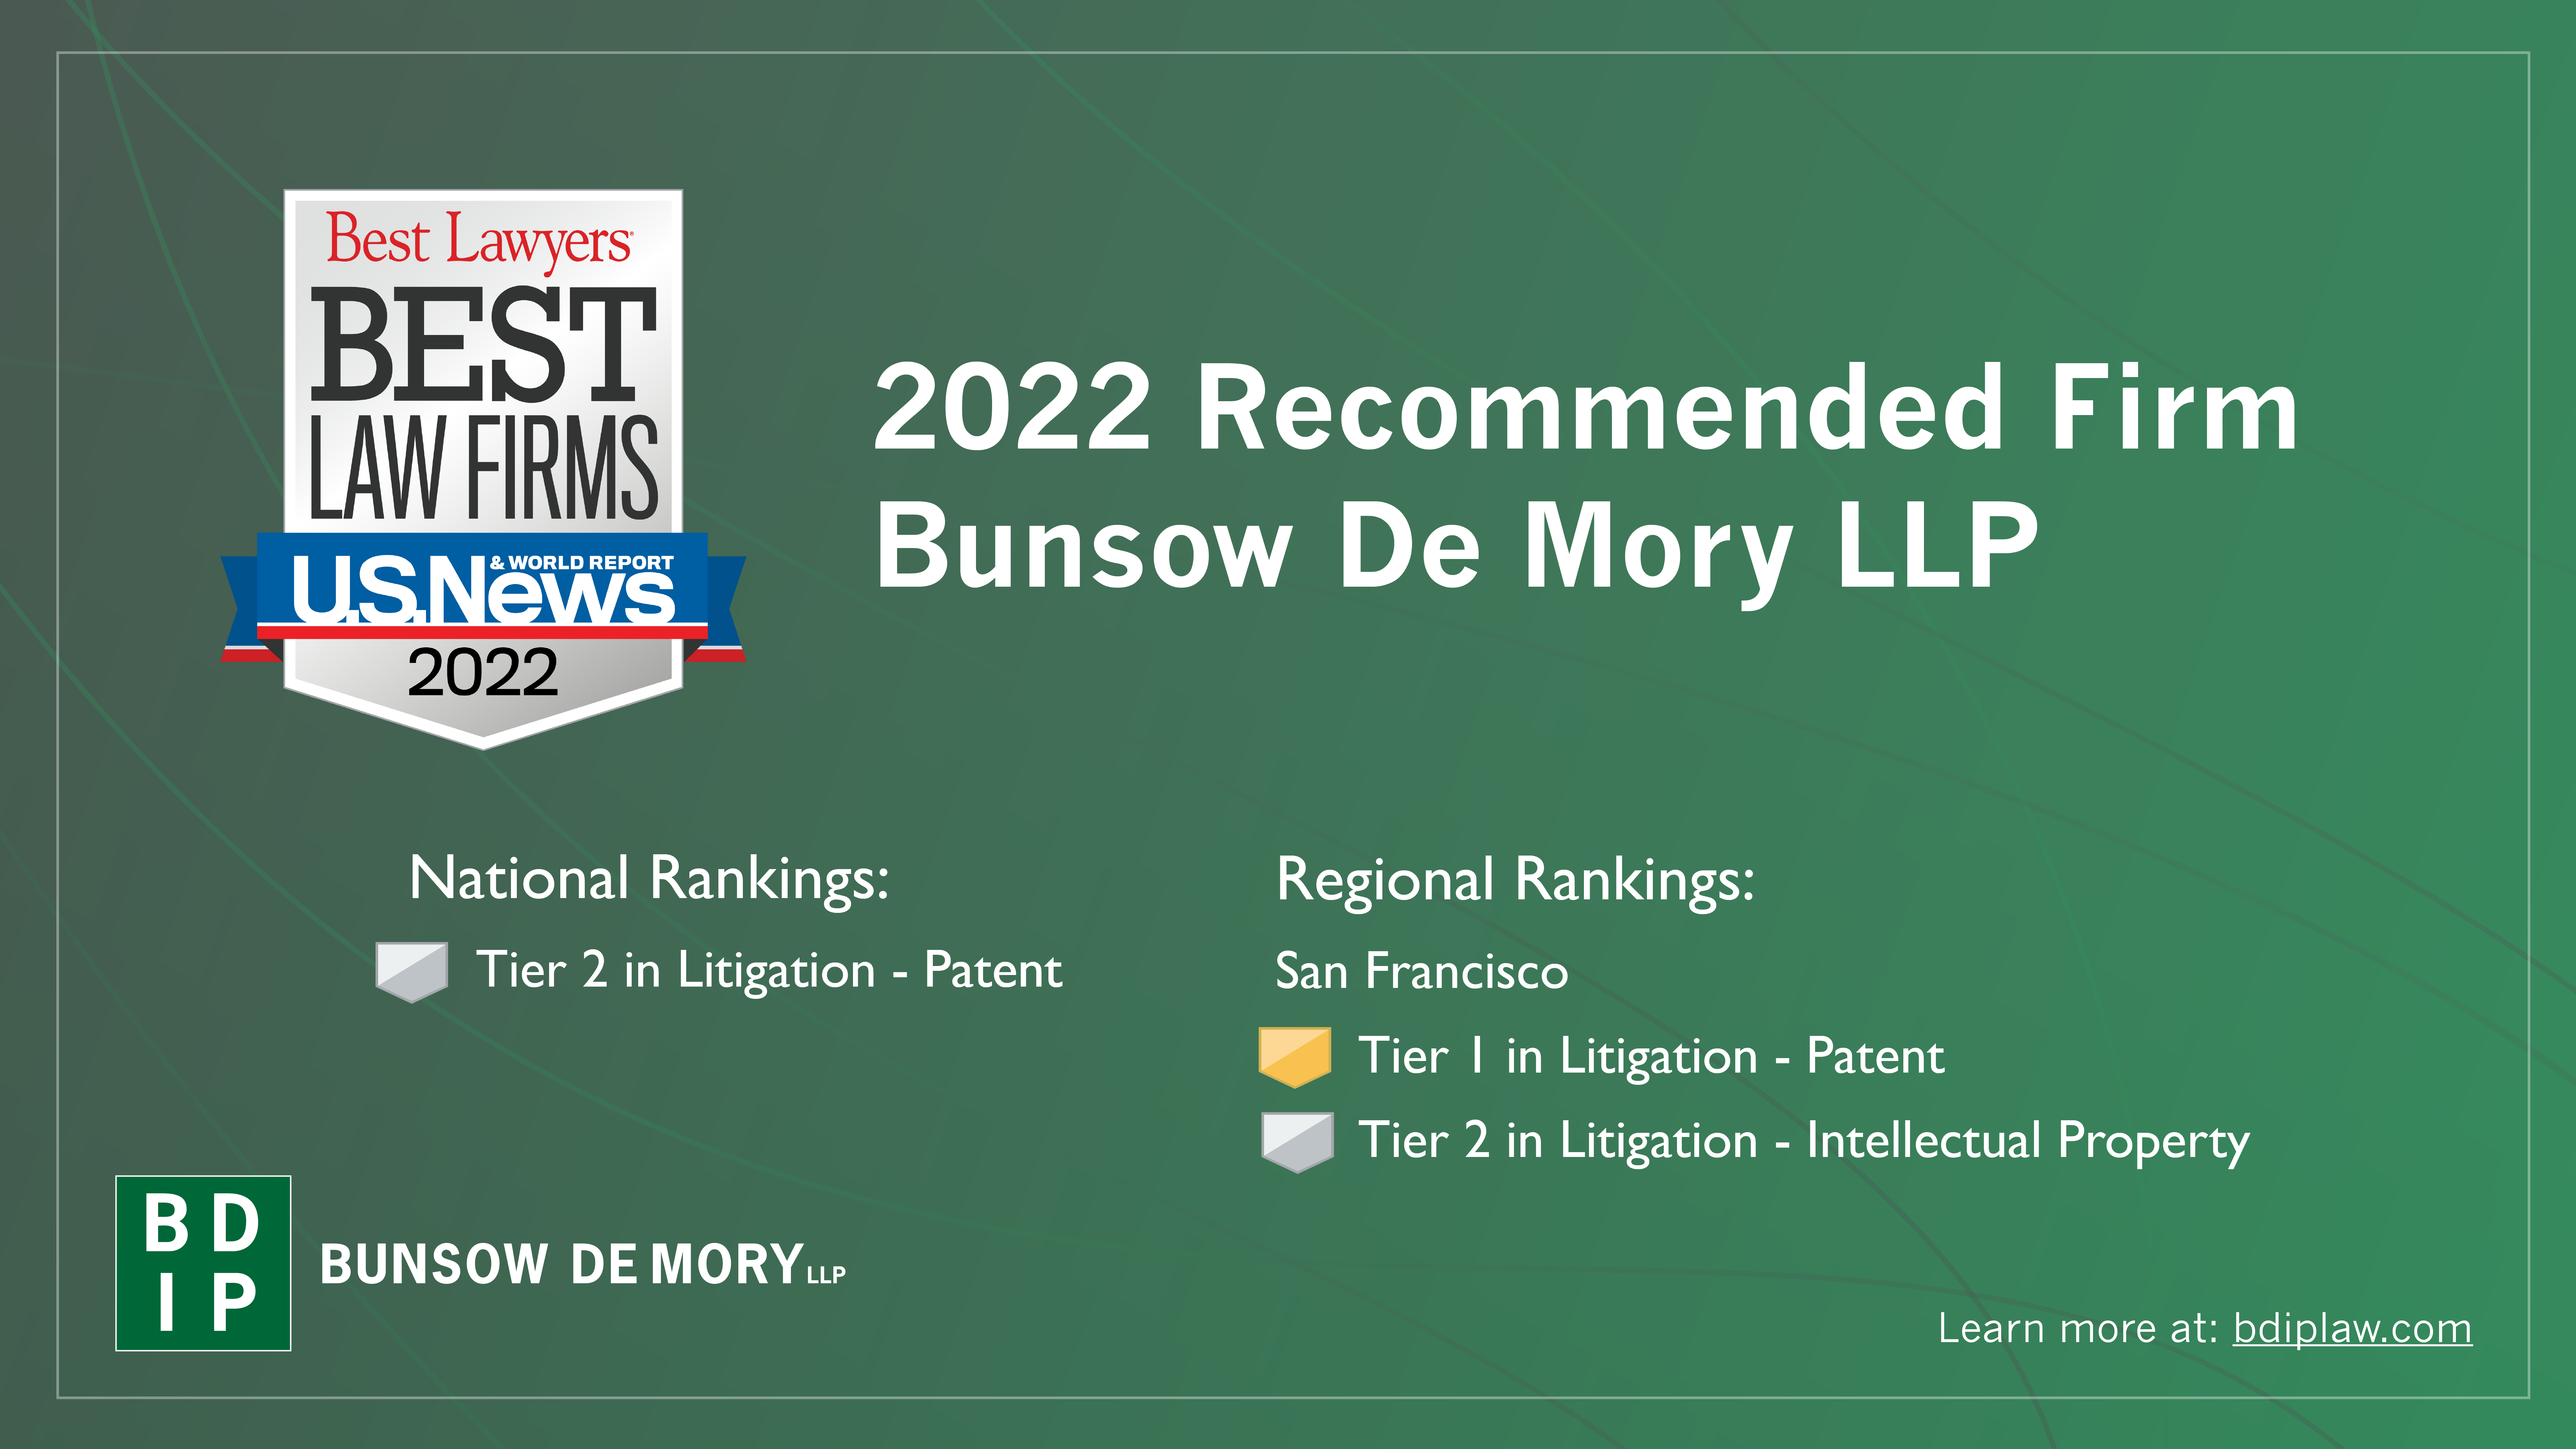 Bunsow De Mory Named Among “Best Law Firms” by U.S. News and World Report and Best Lawyers® in 2022 for Intellectual Property and Patent Litigation